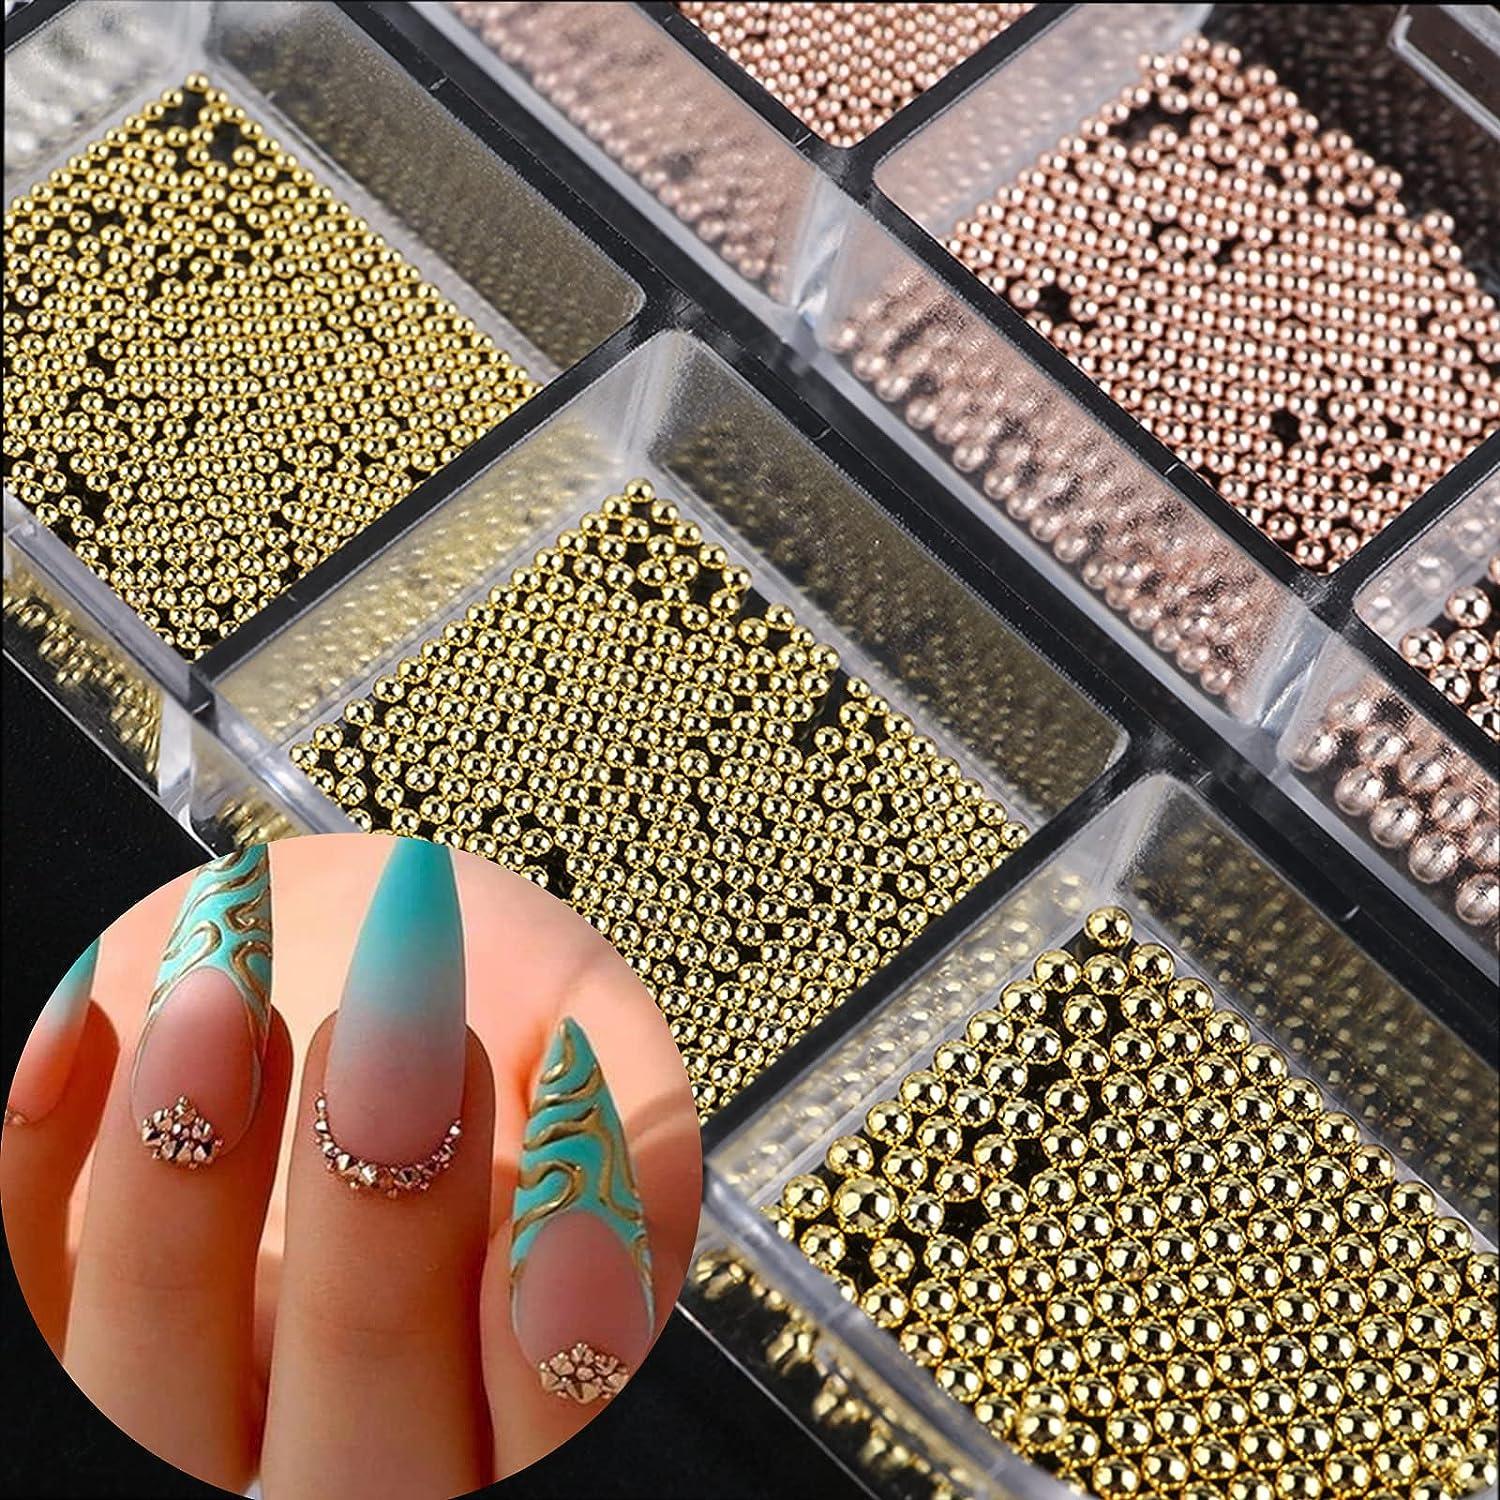 Nail-Art-A-Go-Go Challenge – Day 15: Round and Square | The Nail Art Show